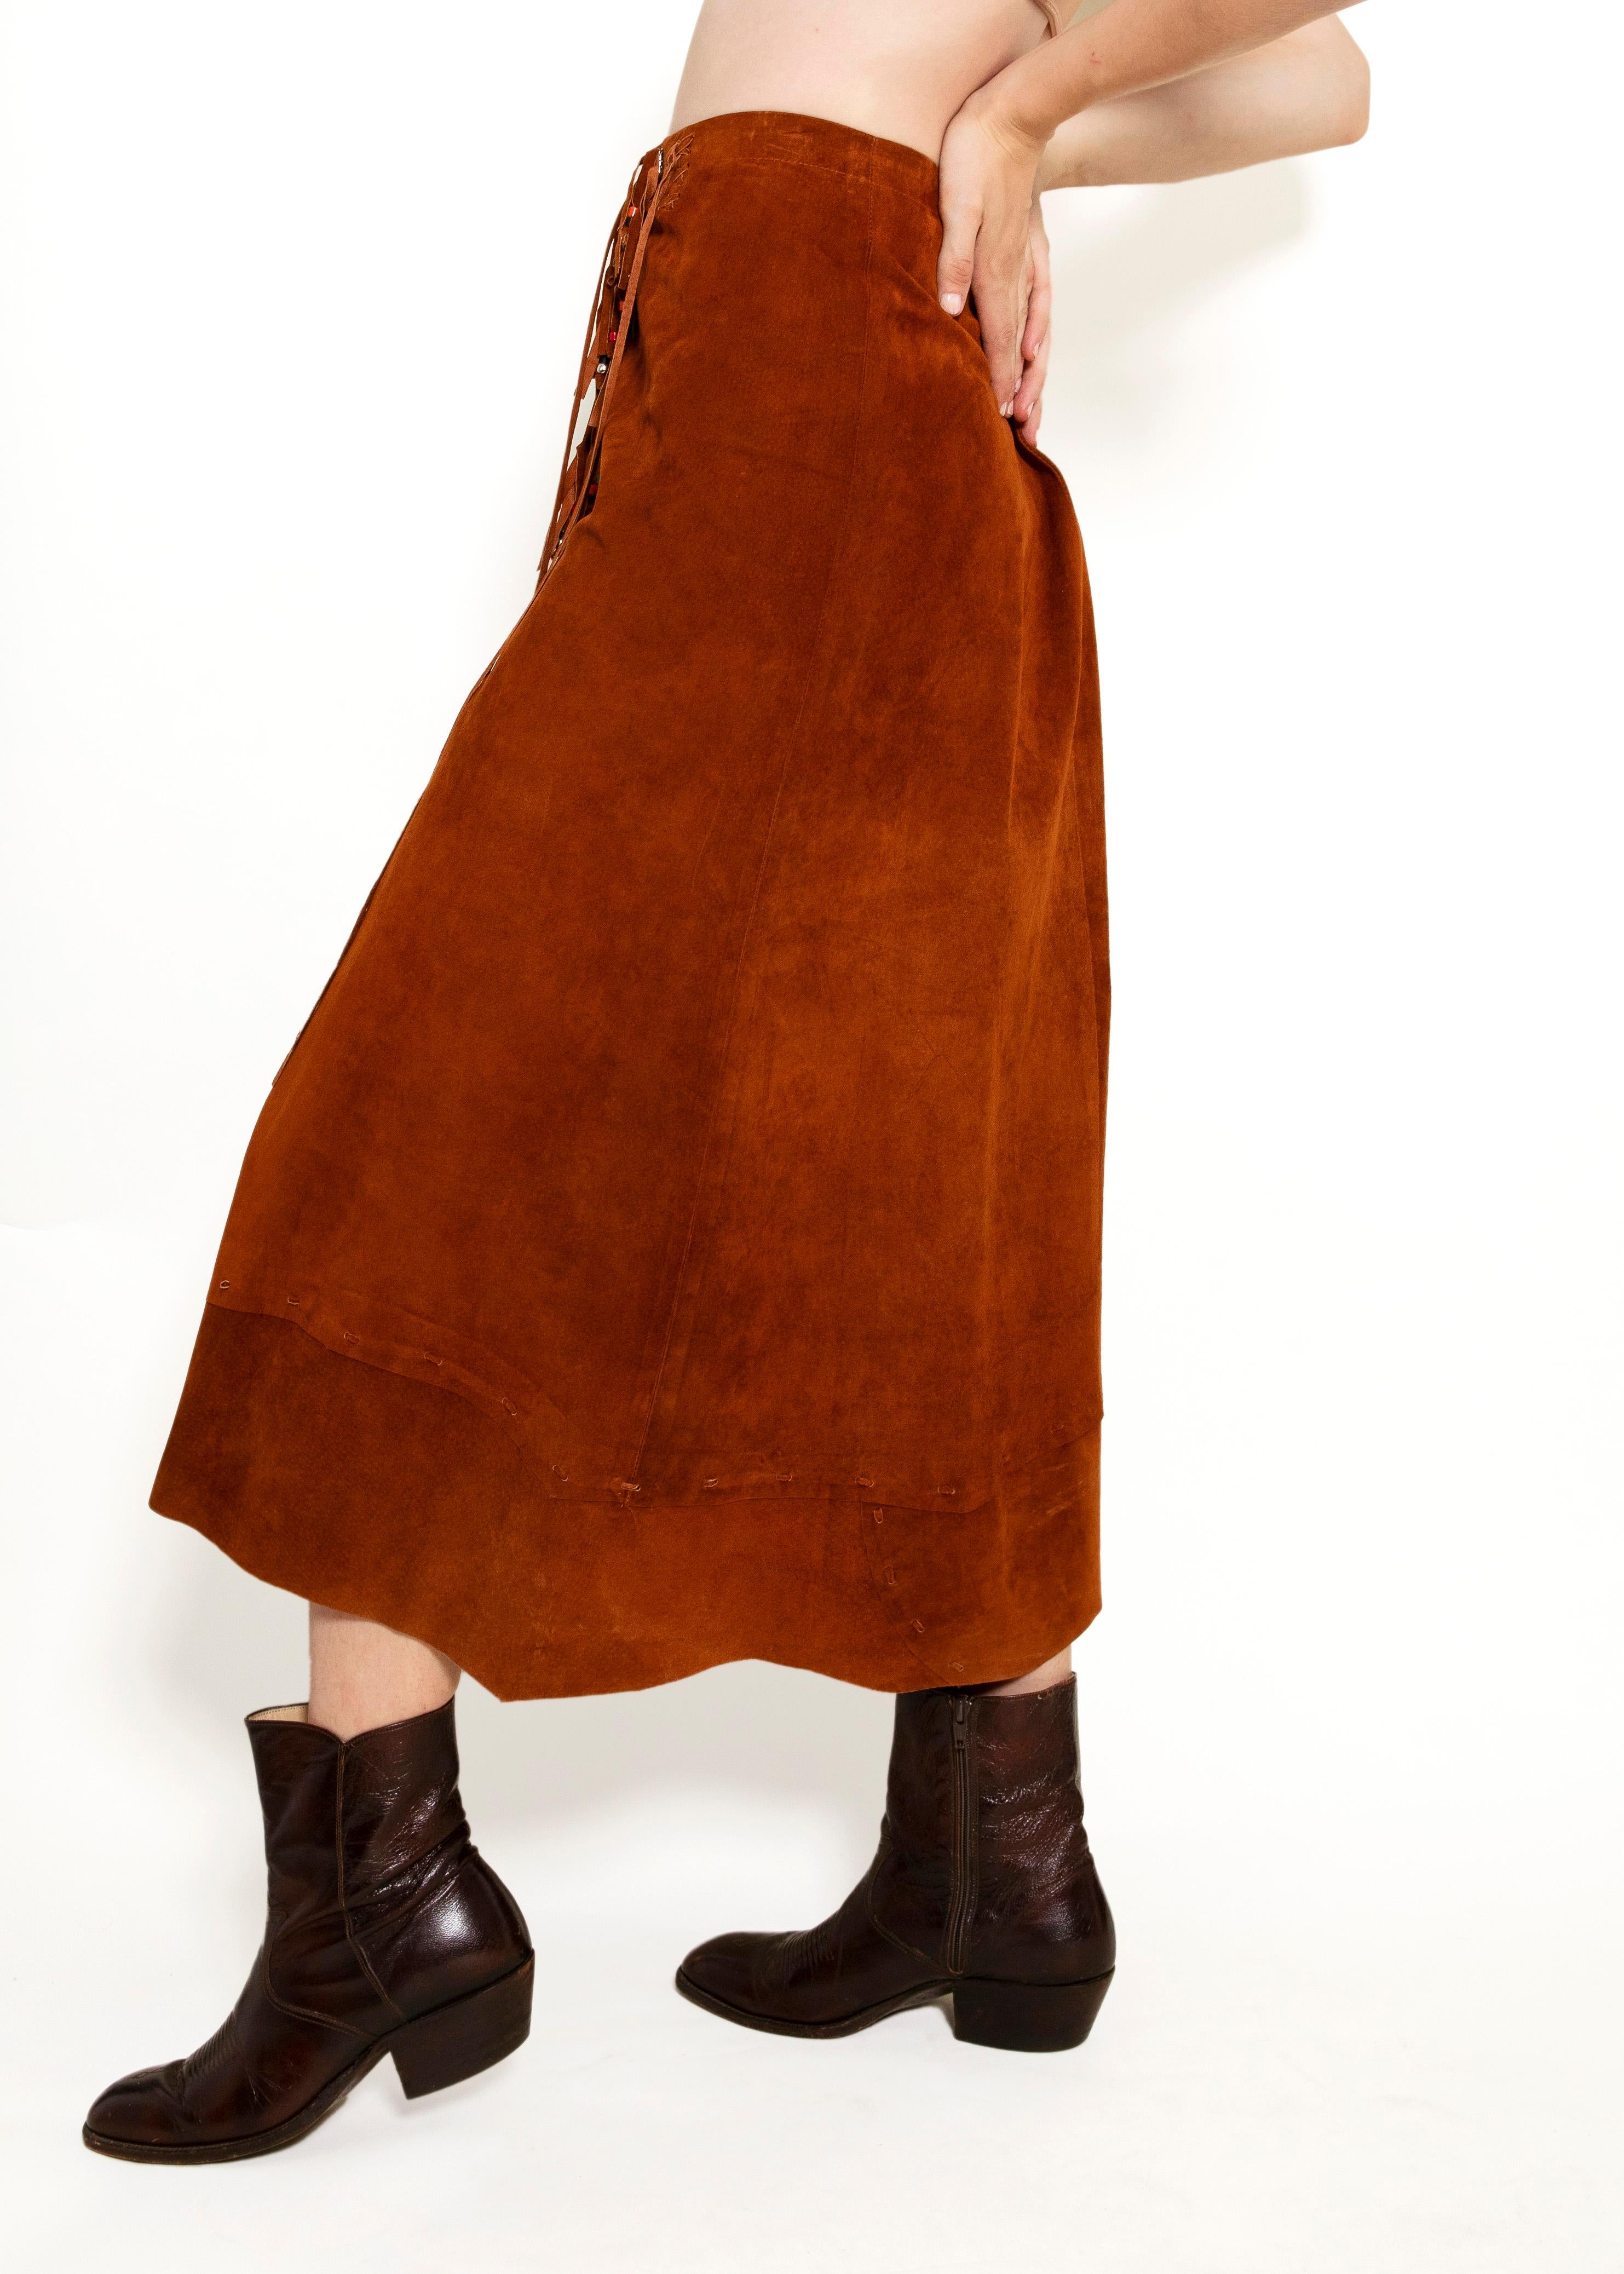 Unleash your inner boho goddess with the Pia Rucci Leather Fringe Skirt. Crafted from burnt sienna suede fabric, this skirt features tassels adorned with multicolor beads, adding a playful touch to its asymmetric design. Go ahead, sway and spin to